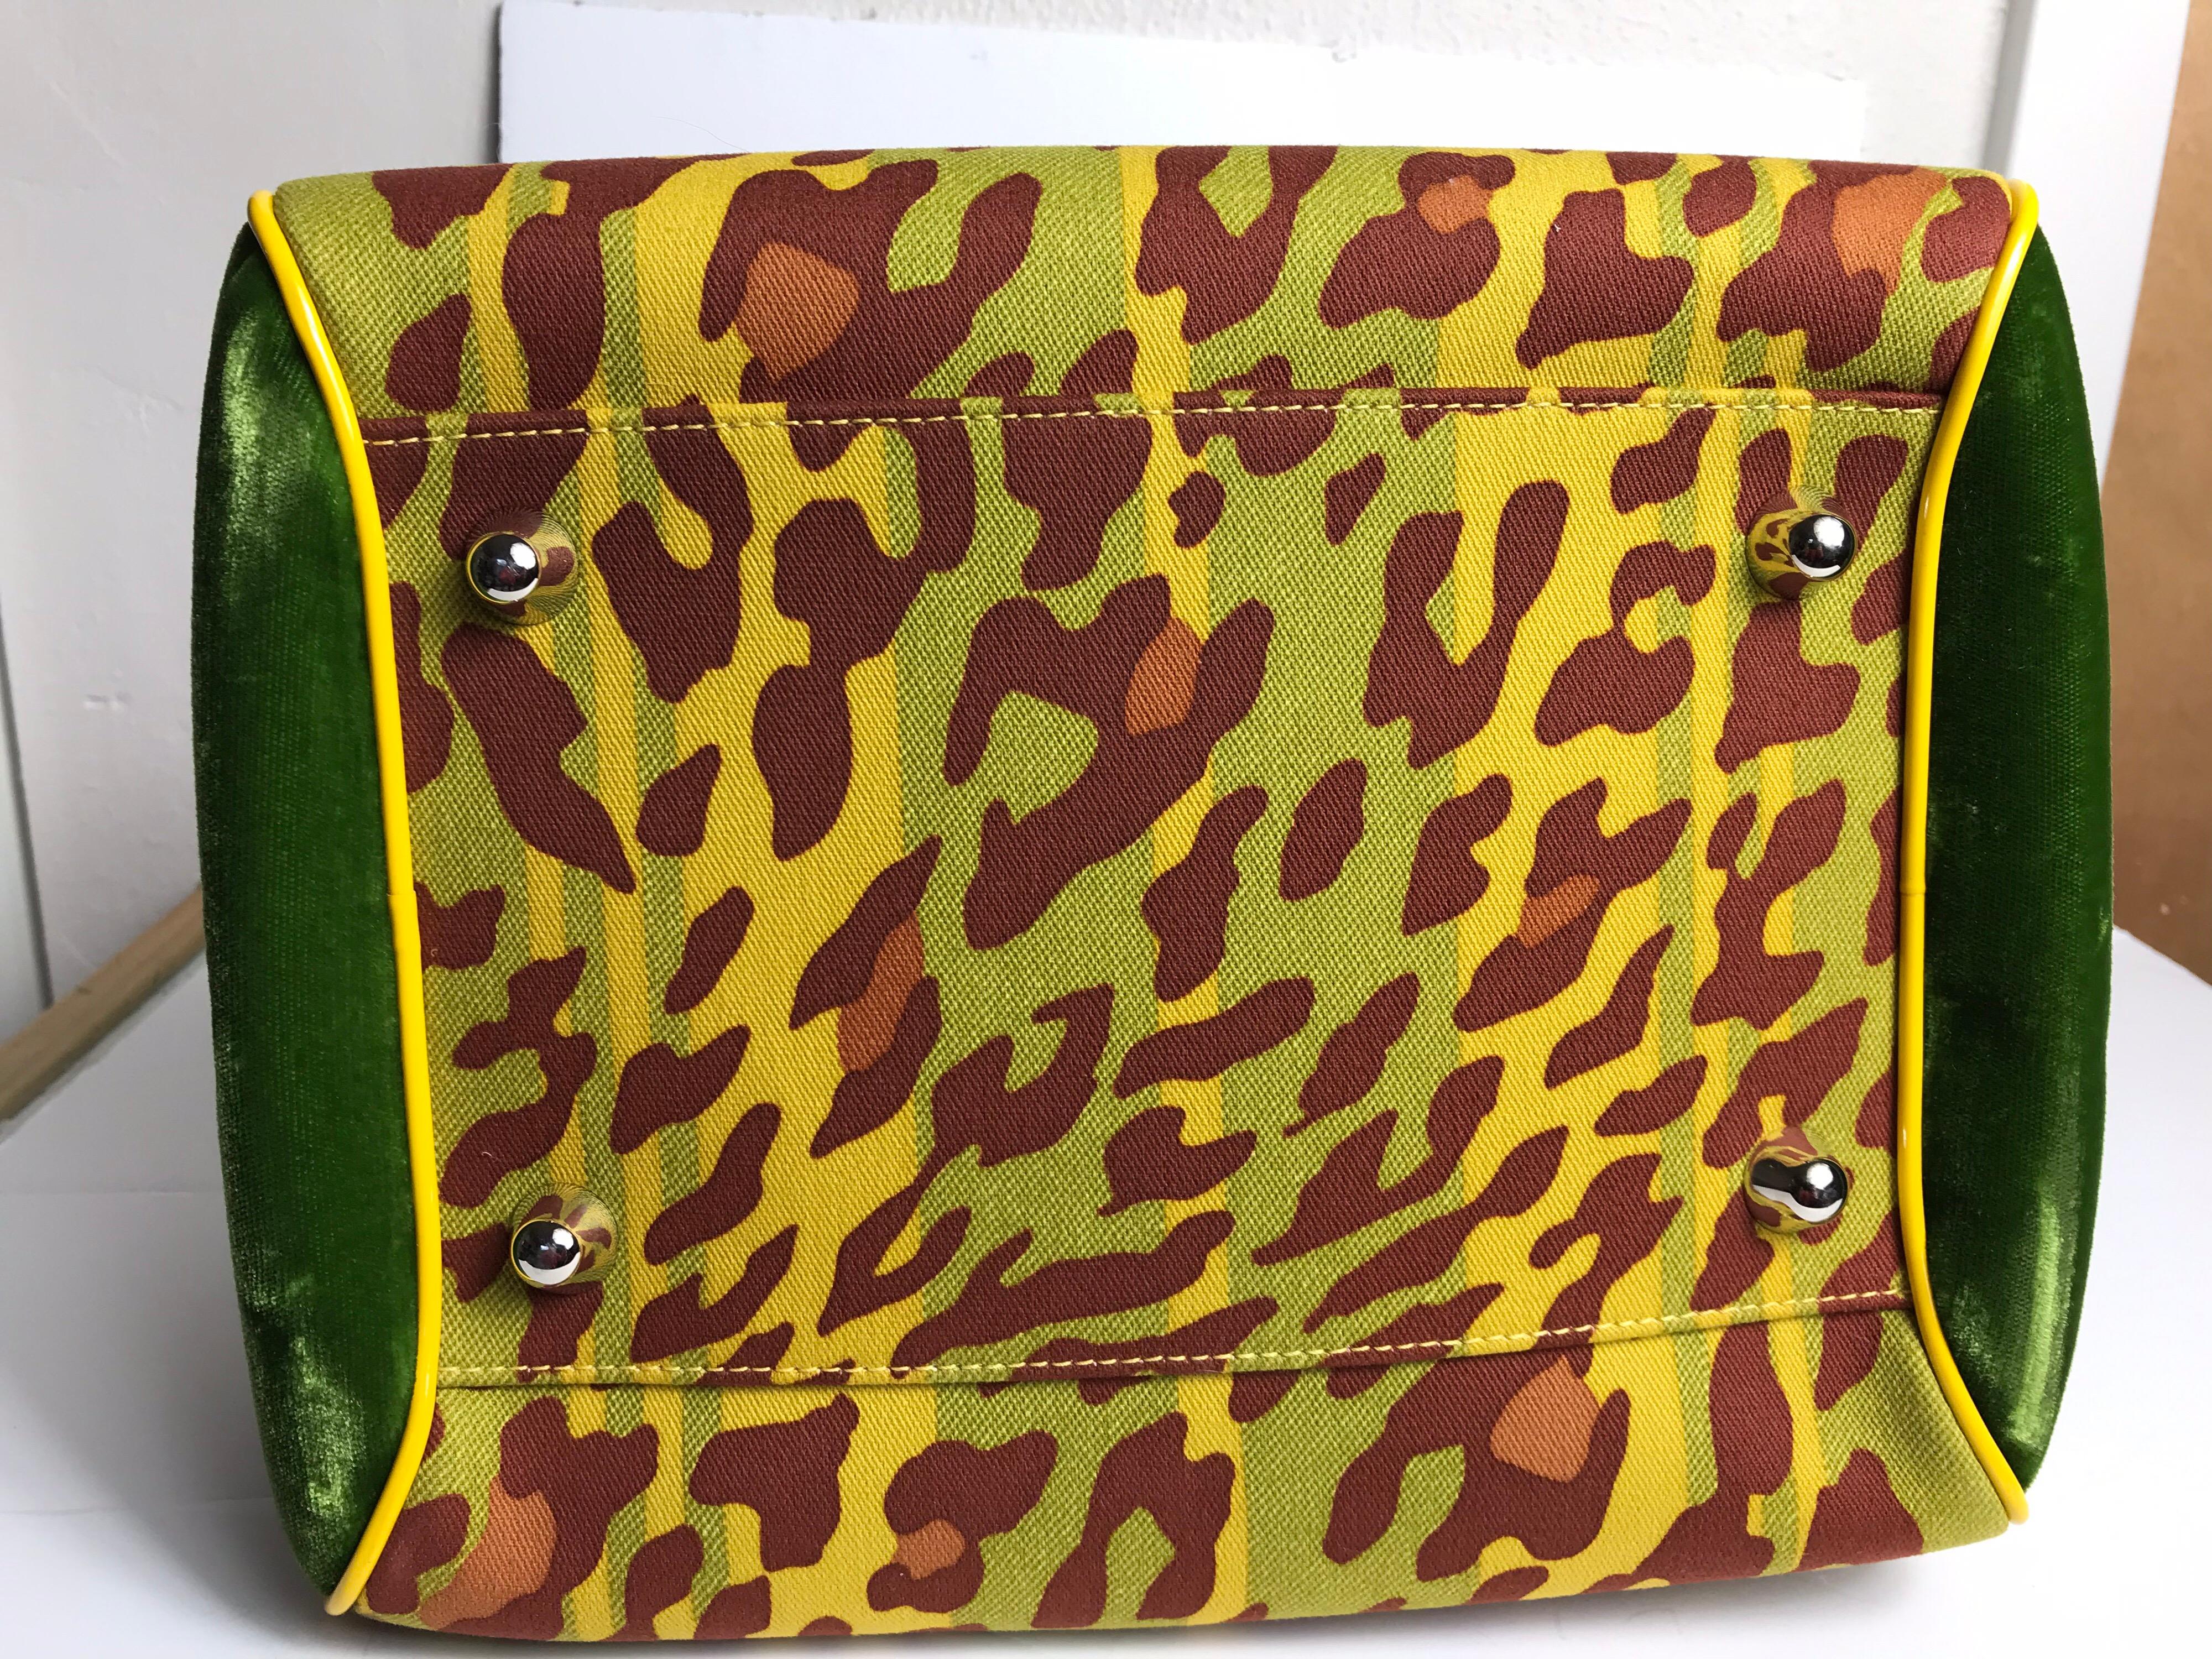 Christian Dior Gambler Dice Bowler Bag. Yellow, green and multicolored printed canvas. With silver tone hardware duel interior pockets. 8” H, 10.5